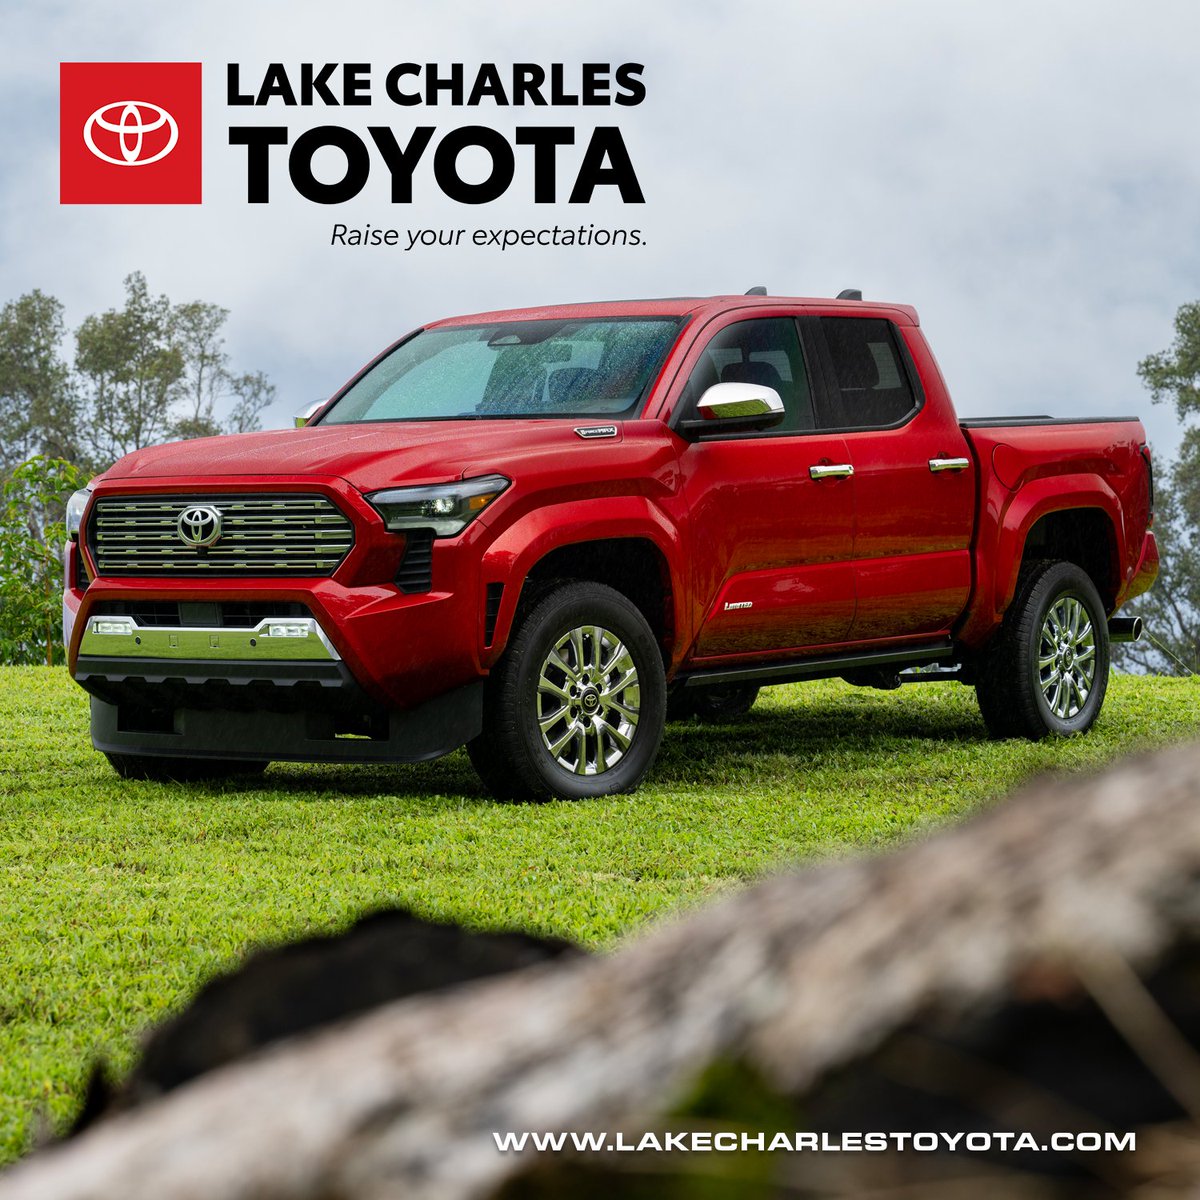 The All-New 2024 Toyota Tacoma is ARRIVING DAILY here at Lake Charles Toyota. View our inventory in person or online where you can use Toyota SmartPath to value your trade, get a real monthly payment and review additional warranty protections. #RaiseYourExpectations